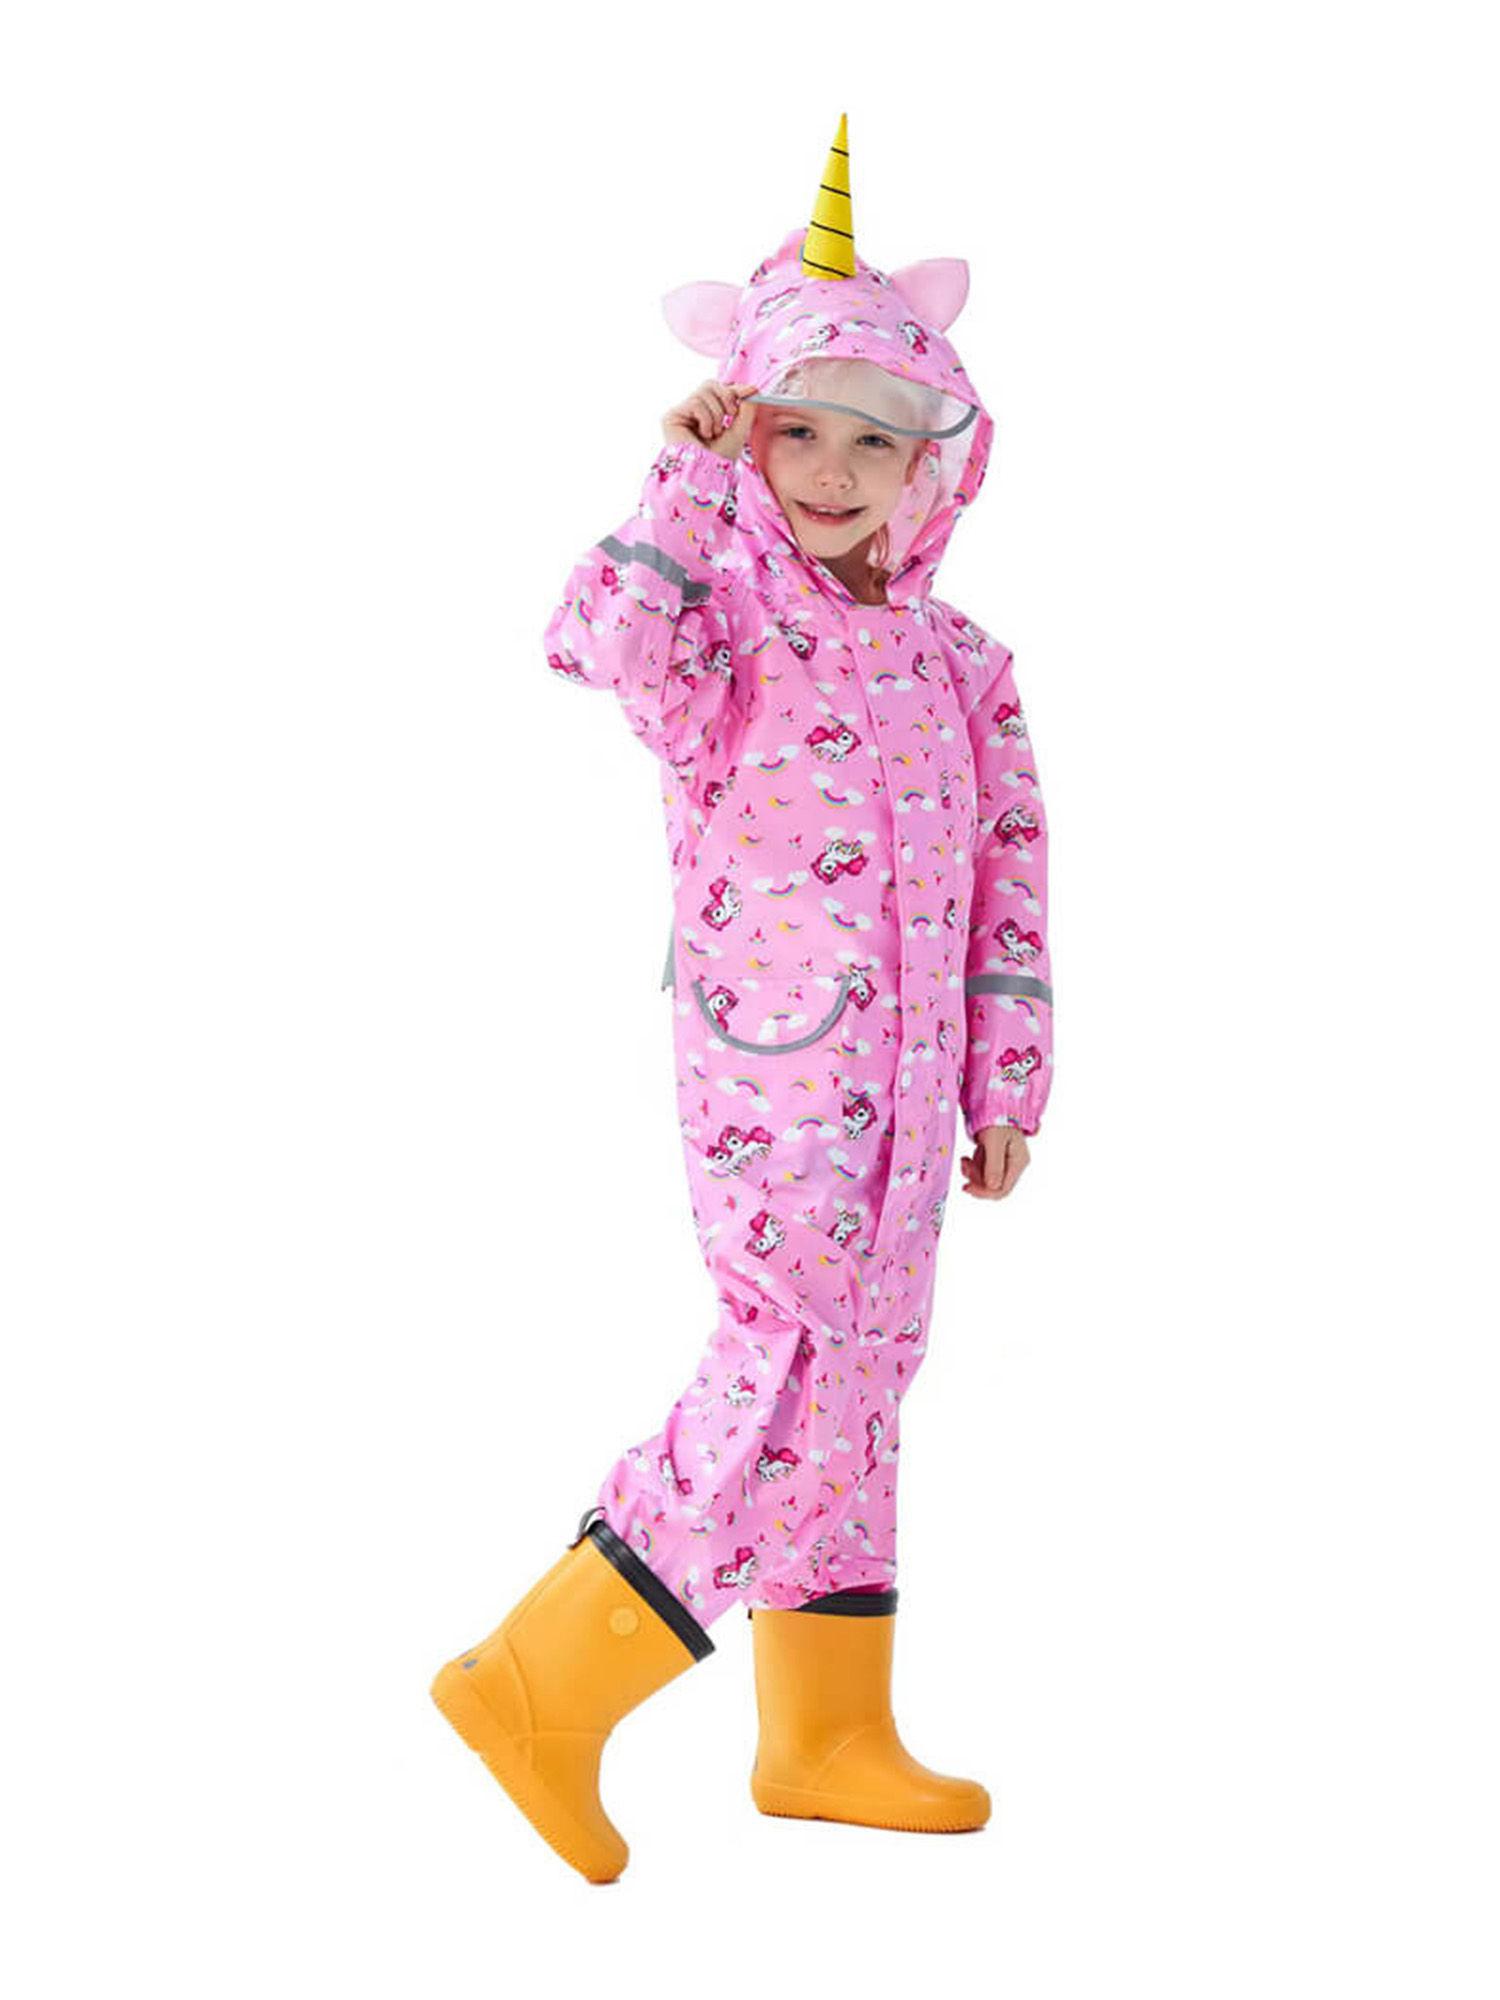 all-over-raincoat-for-kids-pink-unicorn-theme